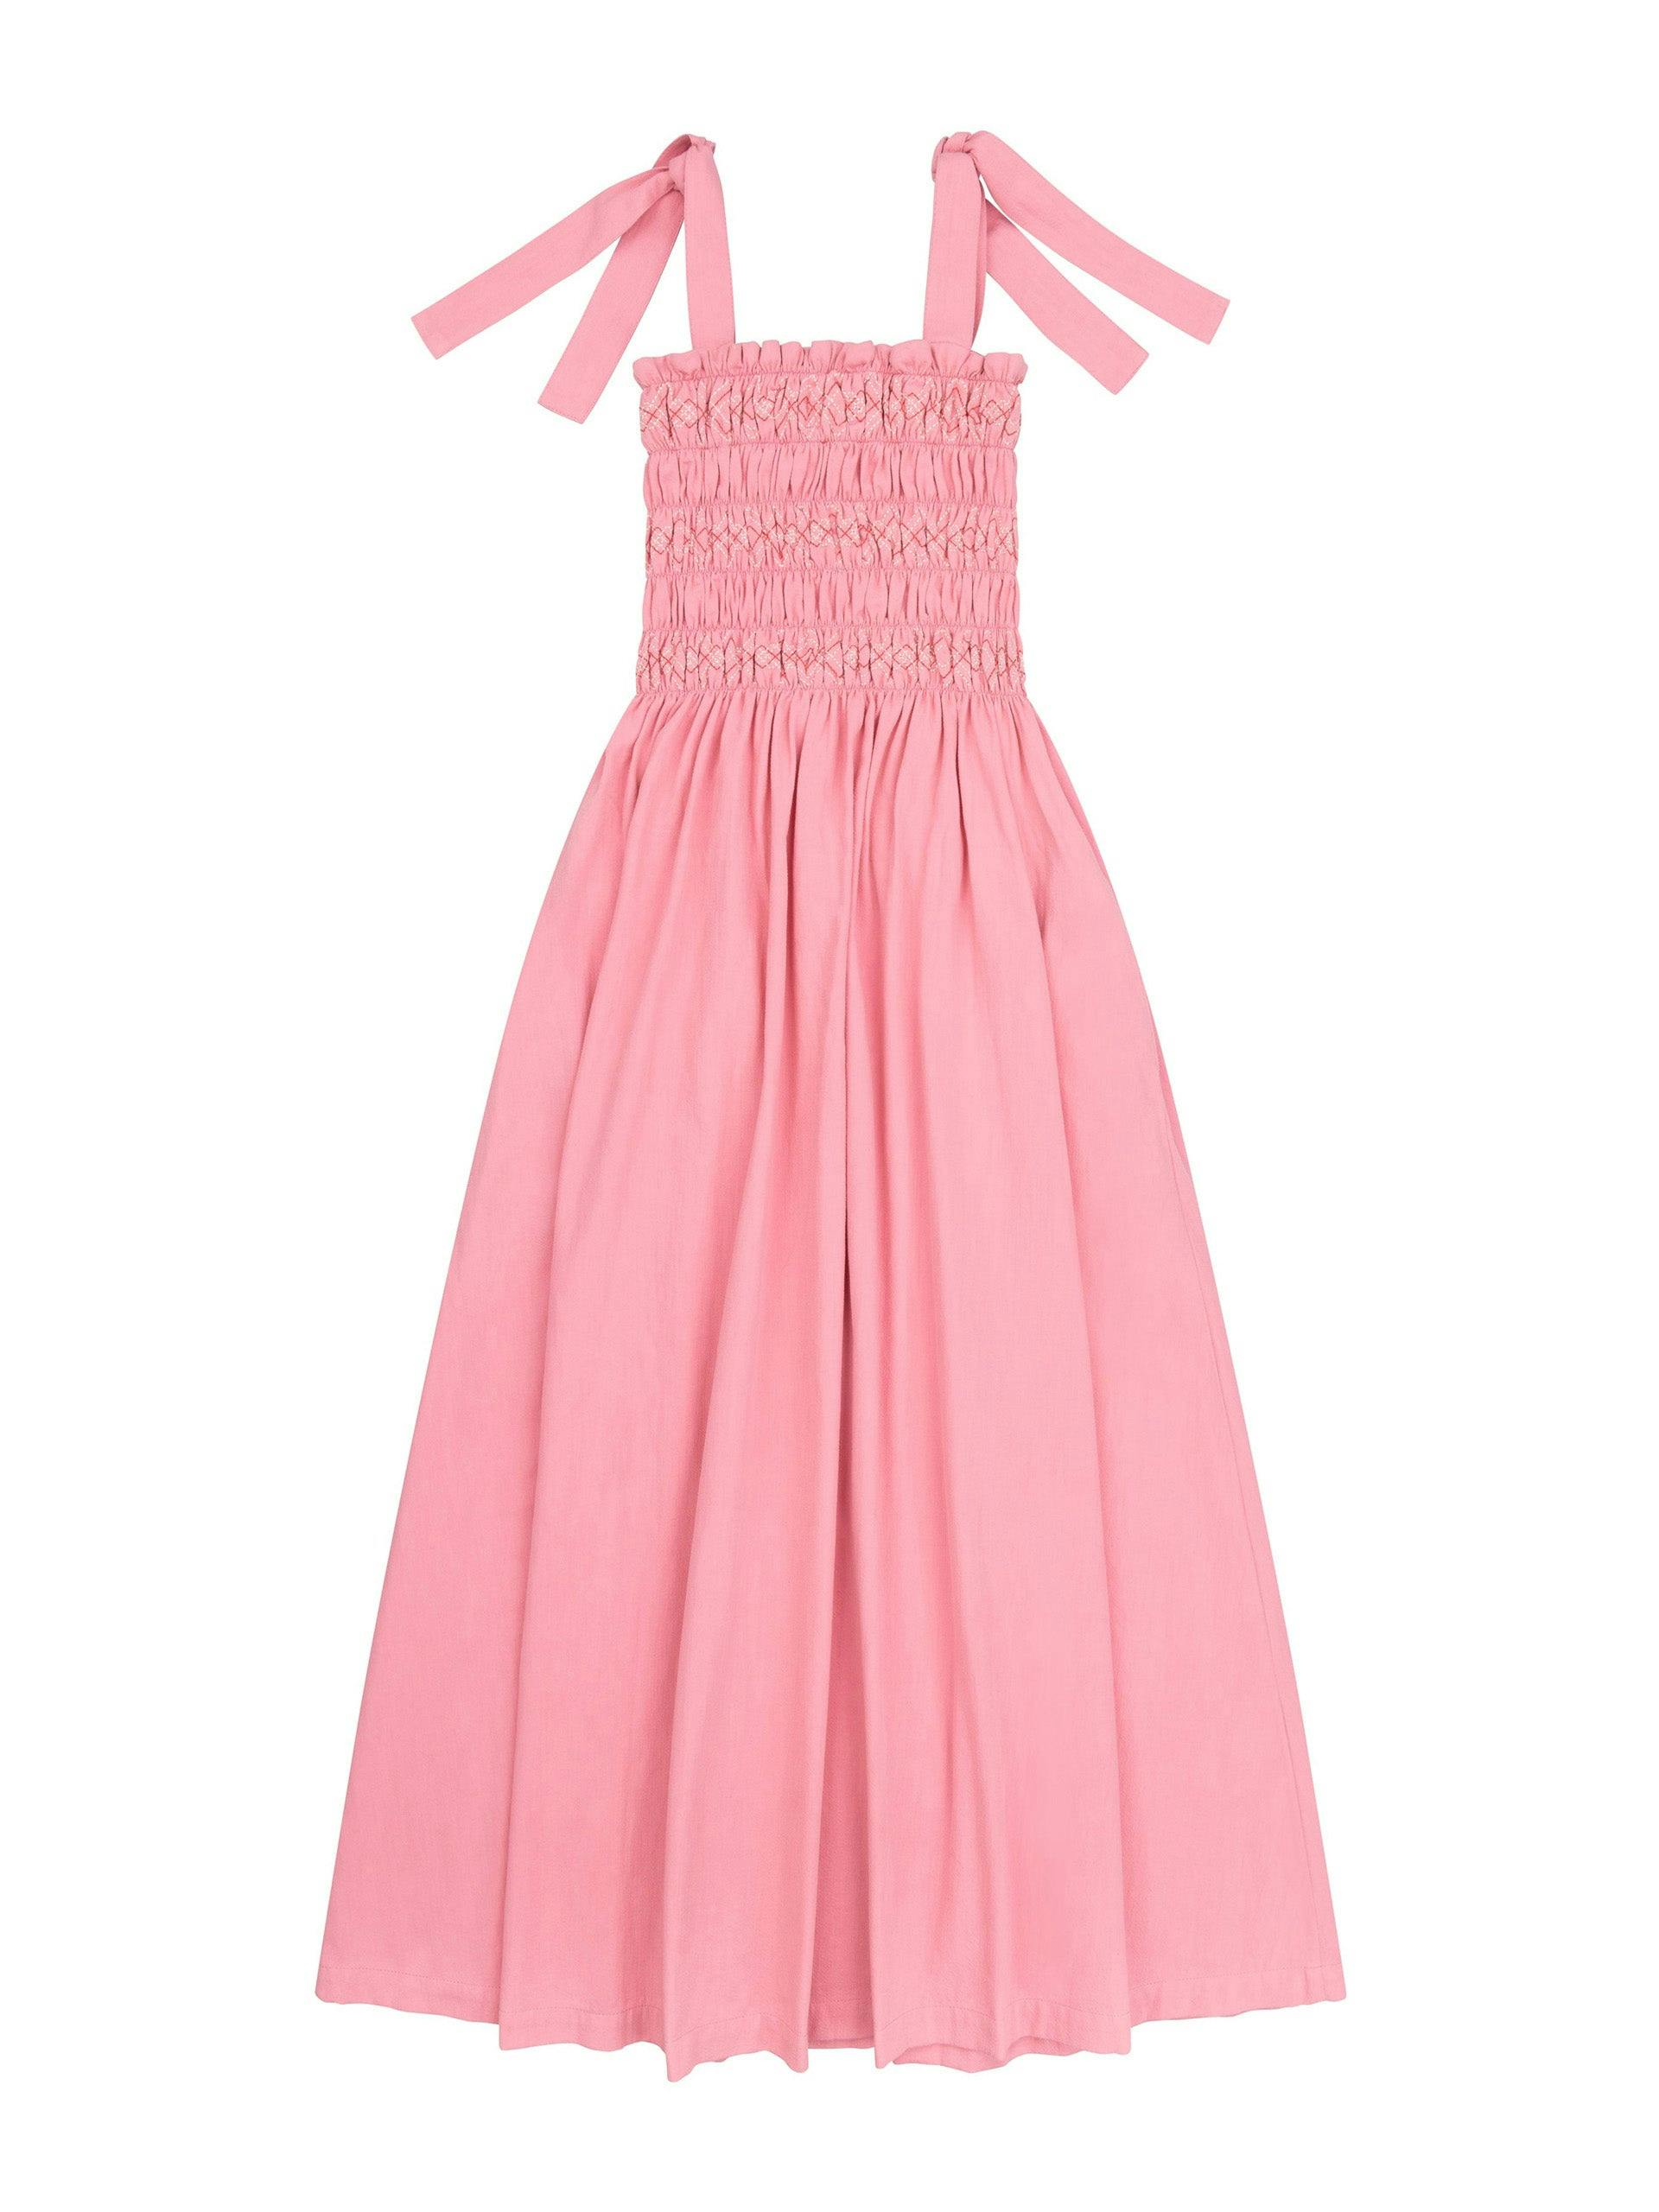 Washed candy floss Sally bandeau tie dress